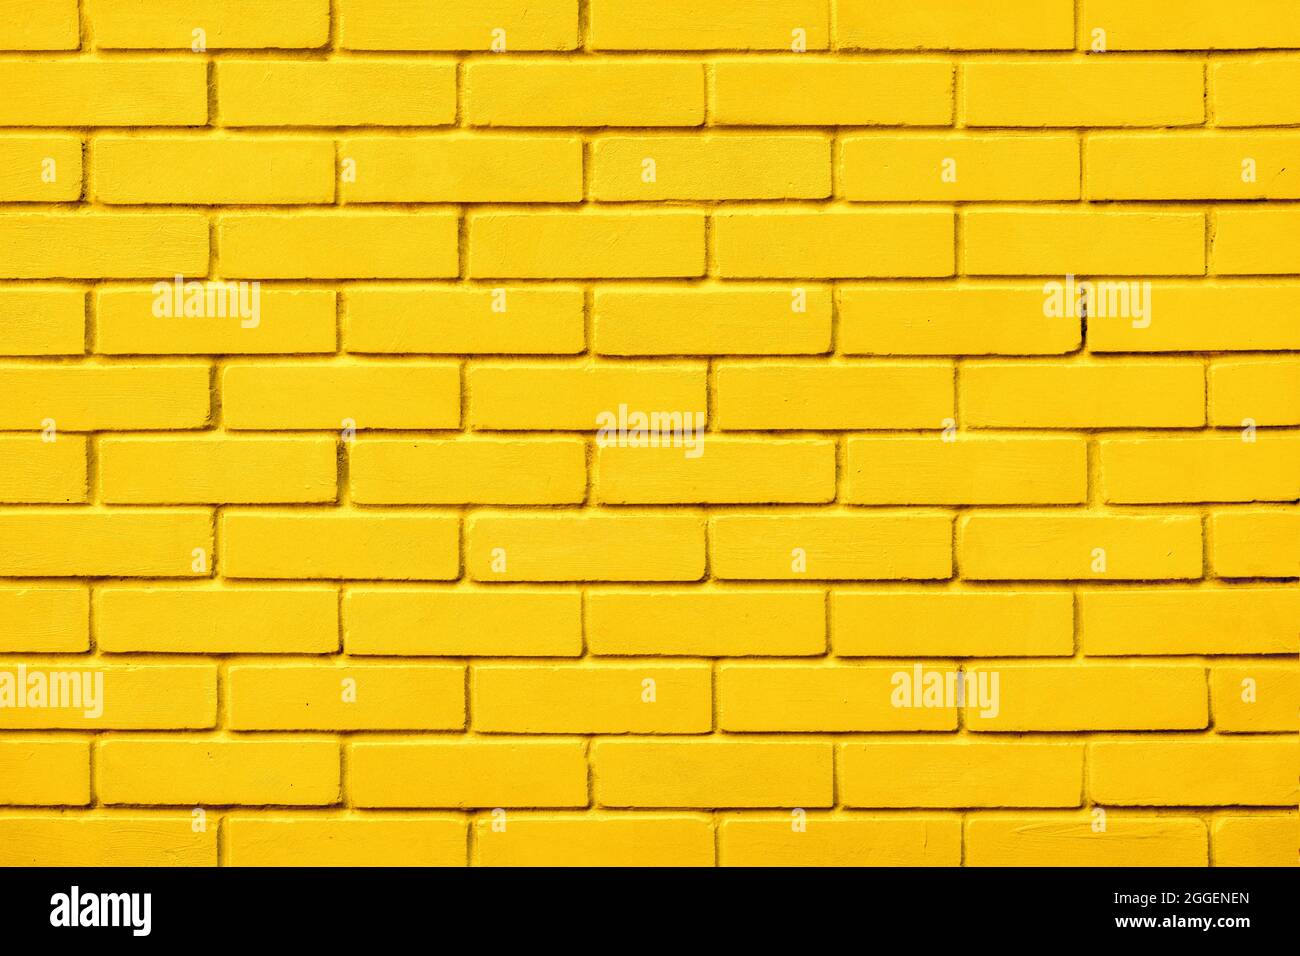 Painted bricks design yellow color wall background blocks. Natural design texture background yellow brick wall color paint block pattern. Block Stock Photo